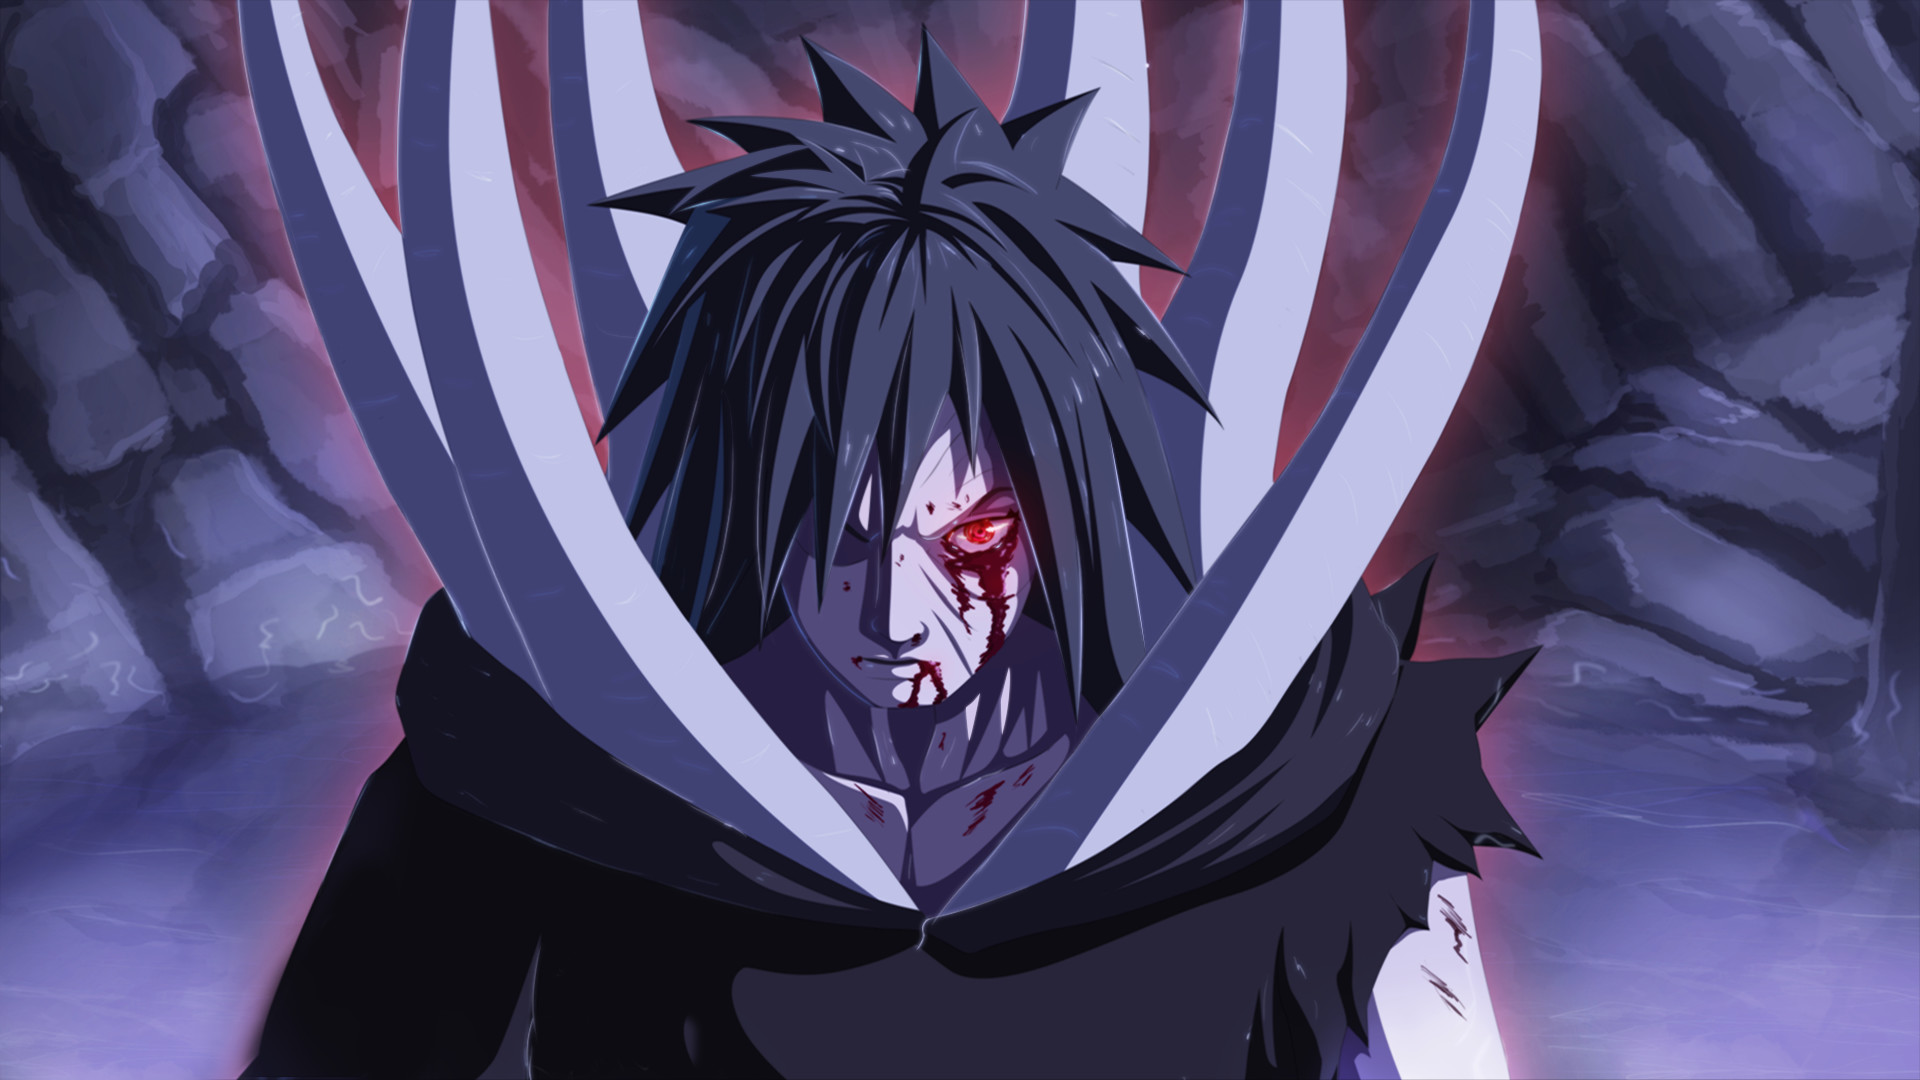 1920x1080 Gallery For 6585530: Uchiha Obito Wallpapers - HD Wallpapers